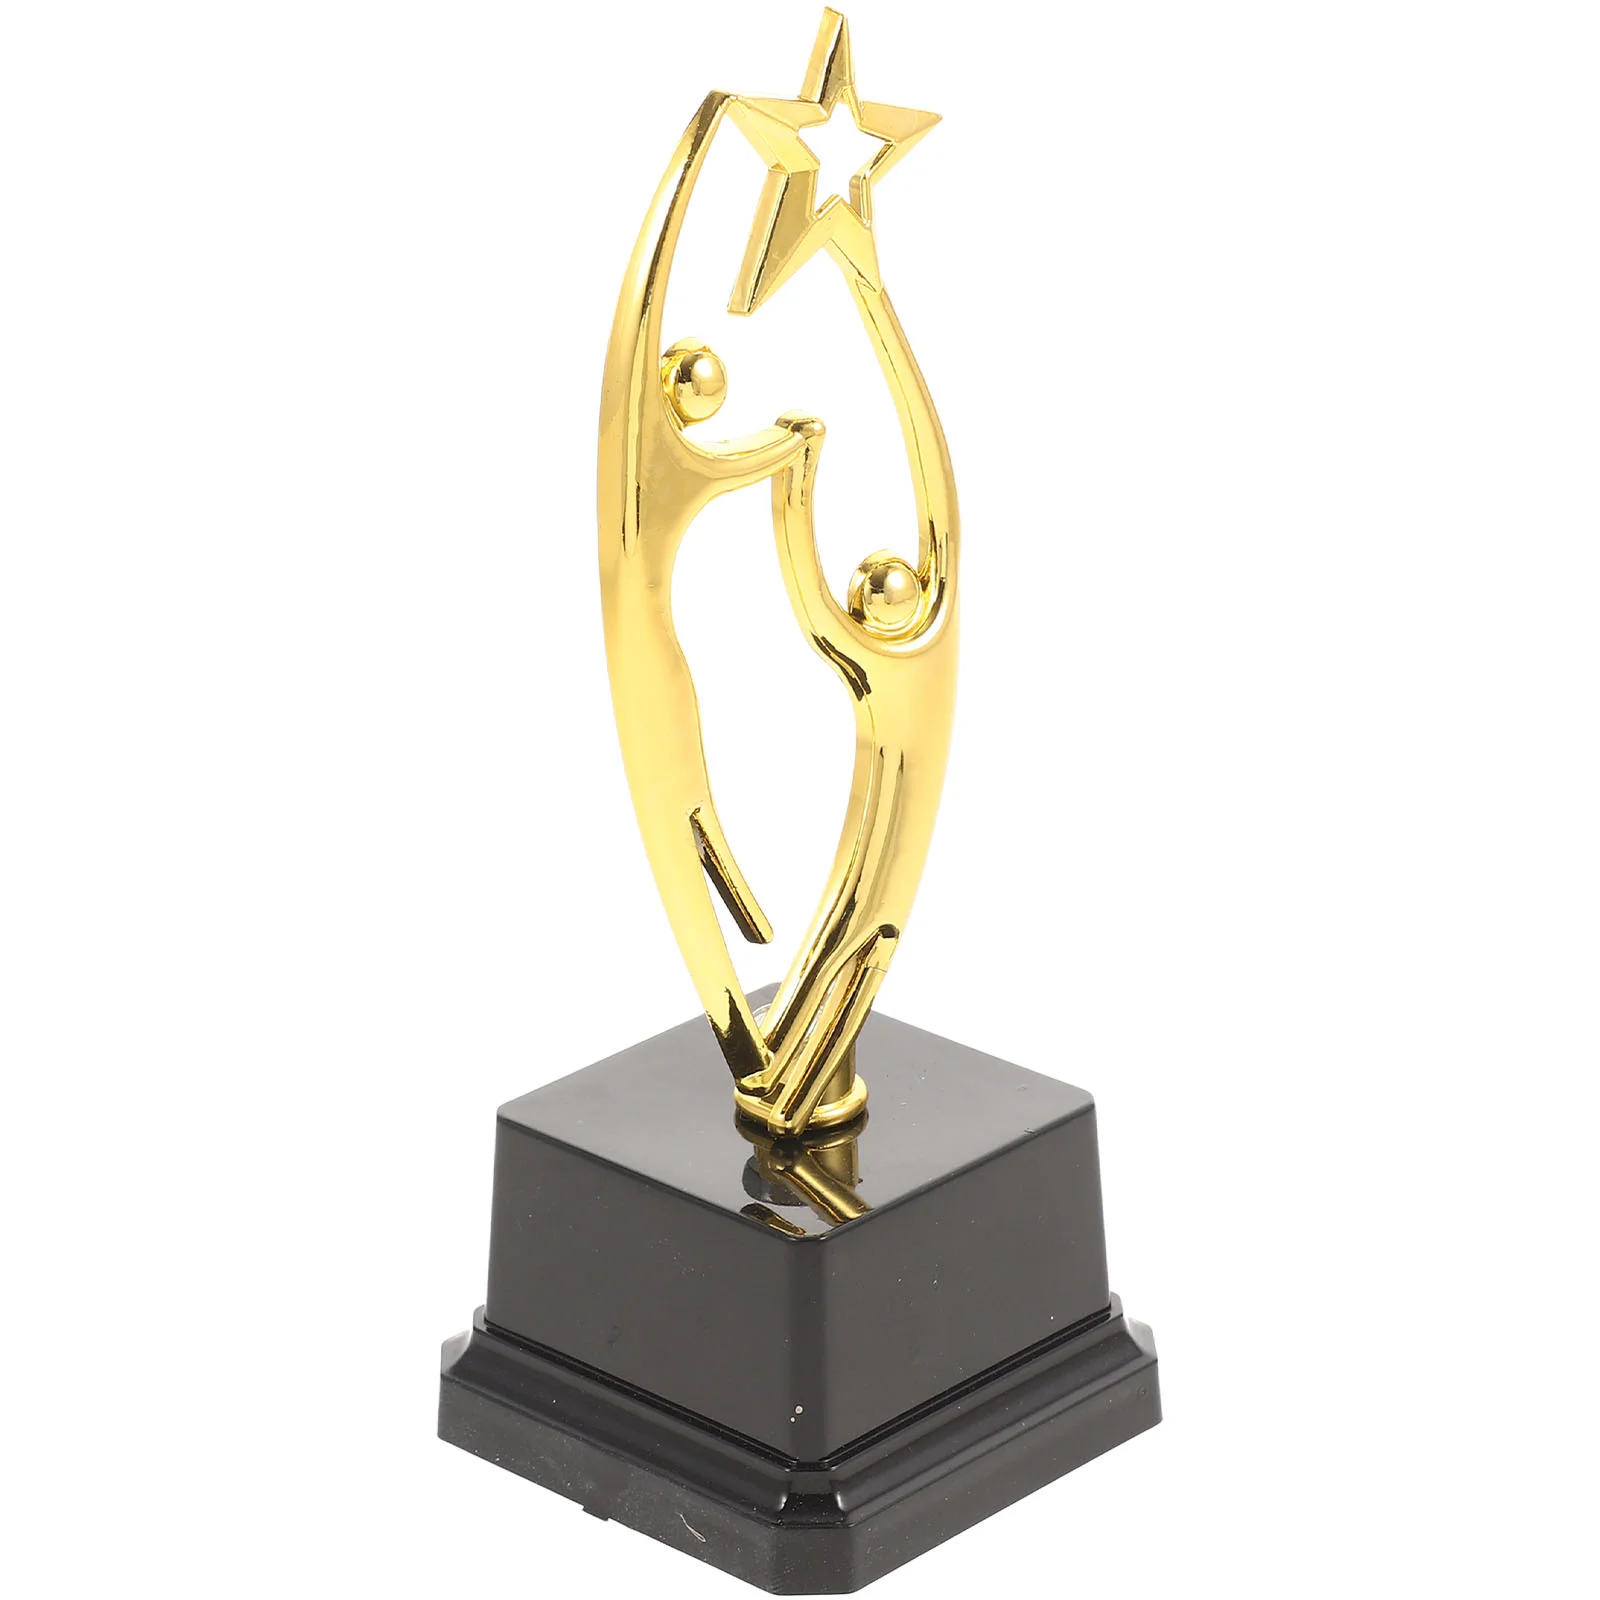 

Decorate Sports Meeting Supply Miniature Trophy Ornament Model Game Prizes Kids Match Award Trophies Kids-parent Soccer